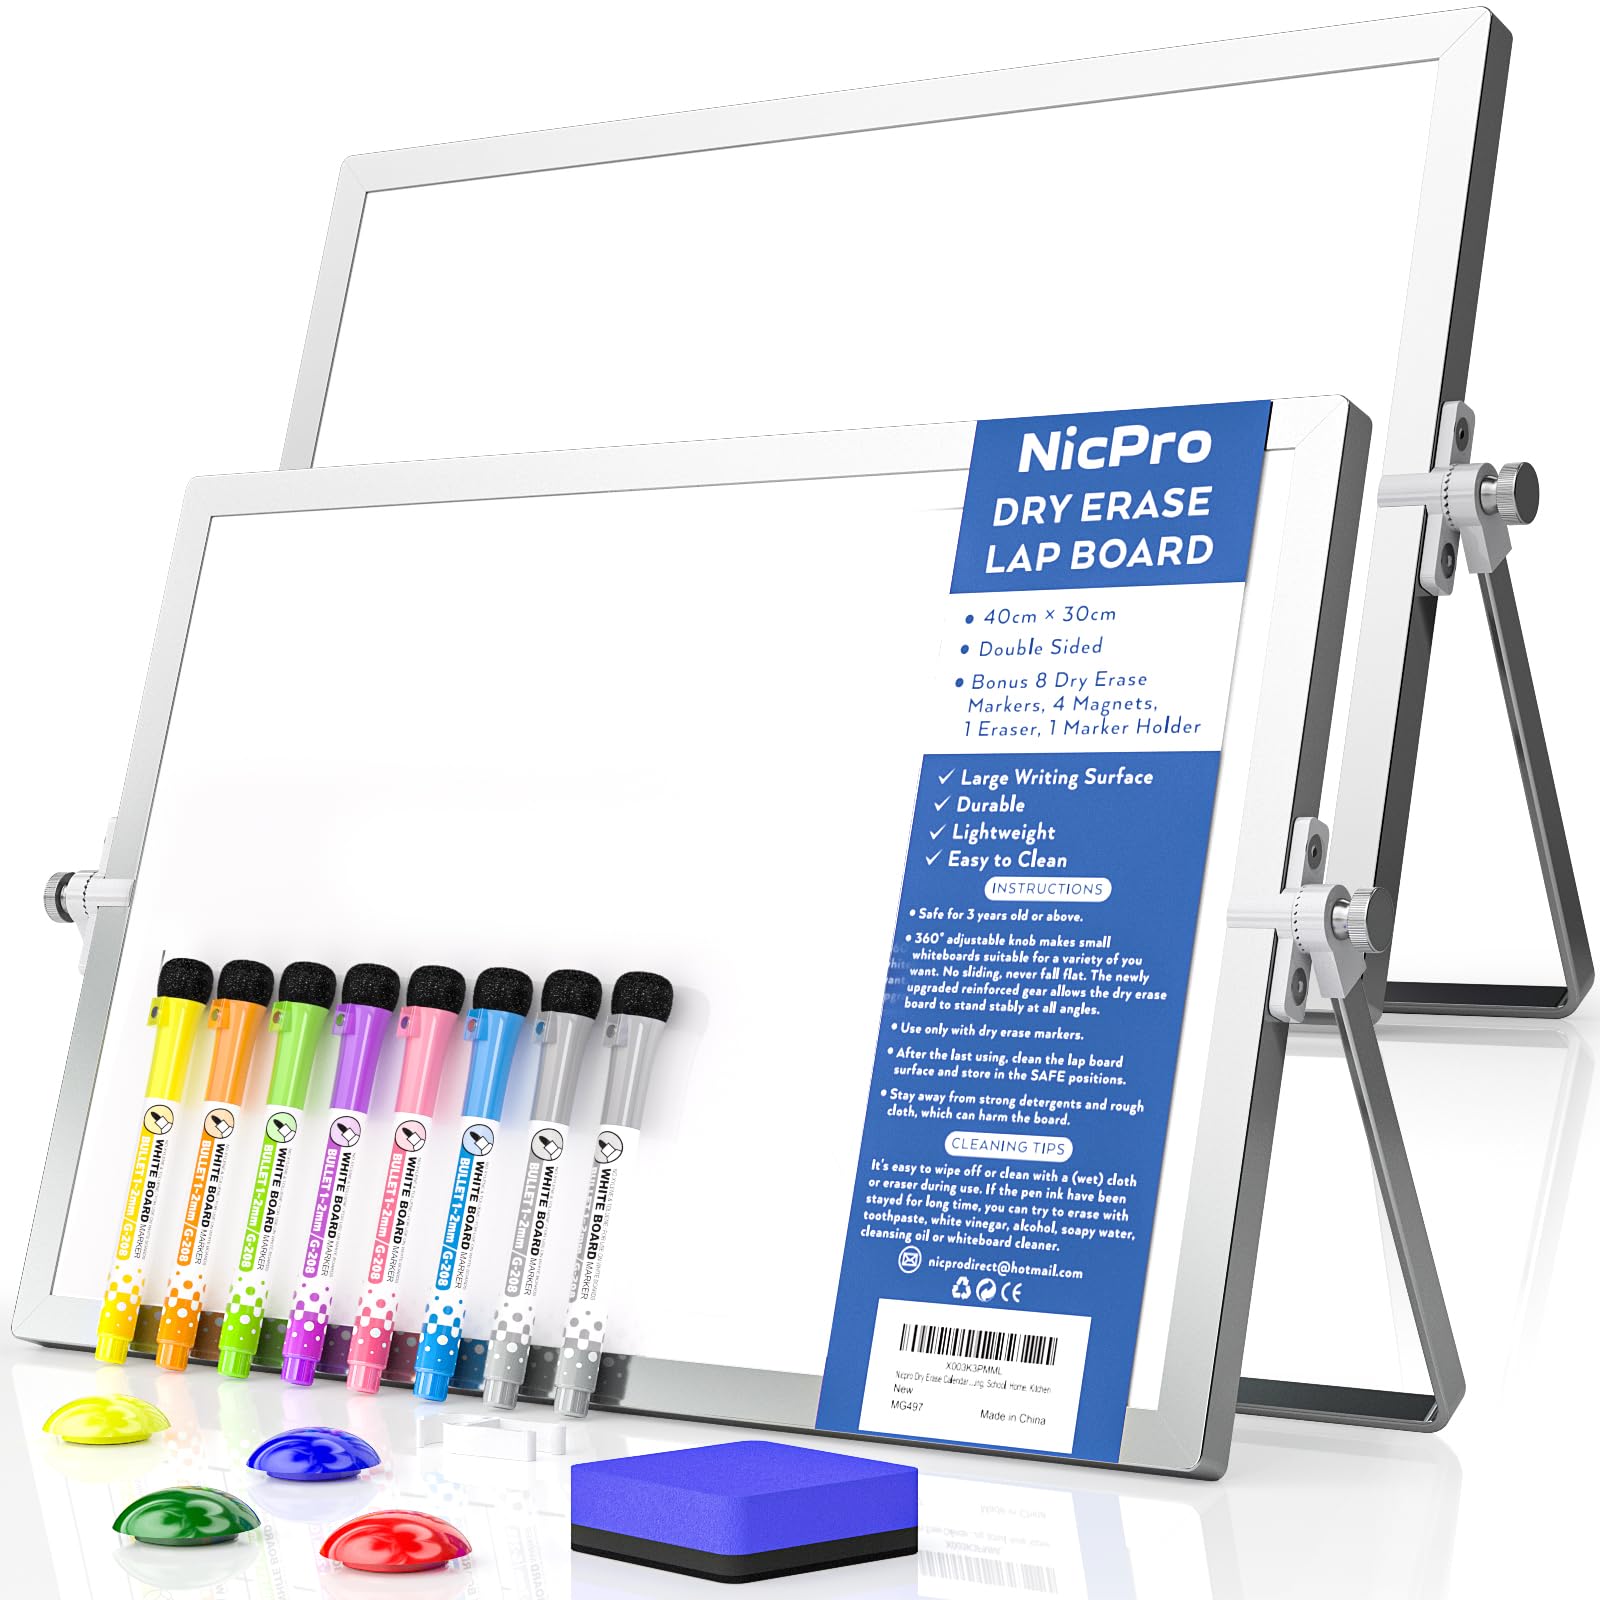 Nicpro Dry Erase Calendar Whiteboard, 12 x 16 inch Double Sided Large